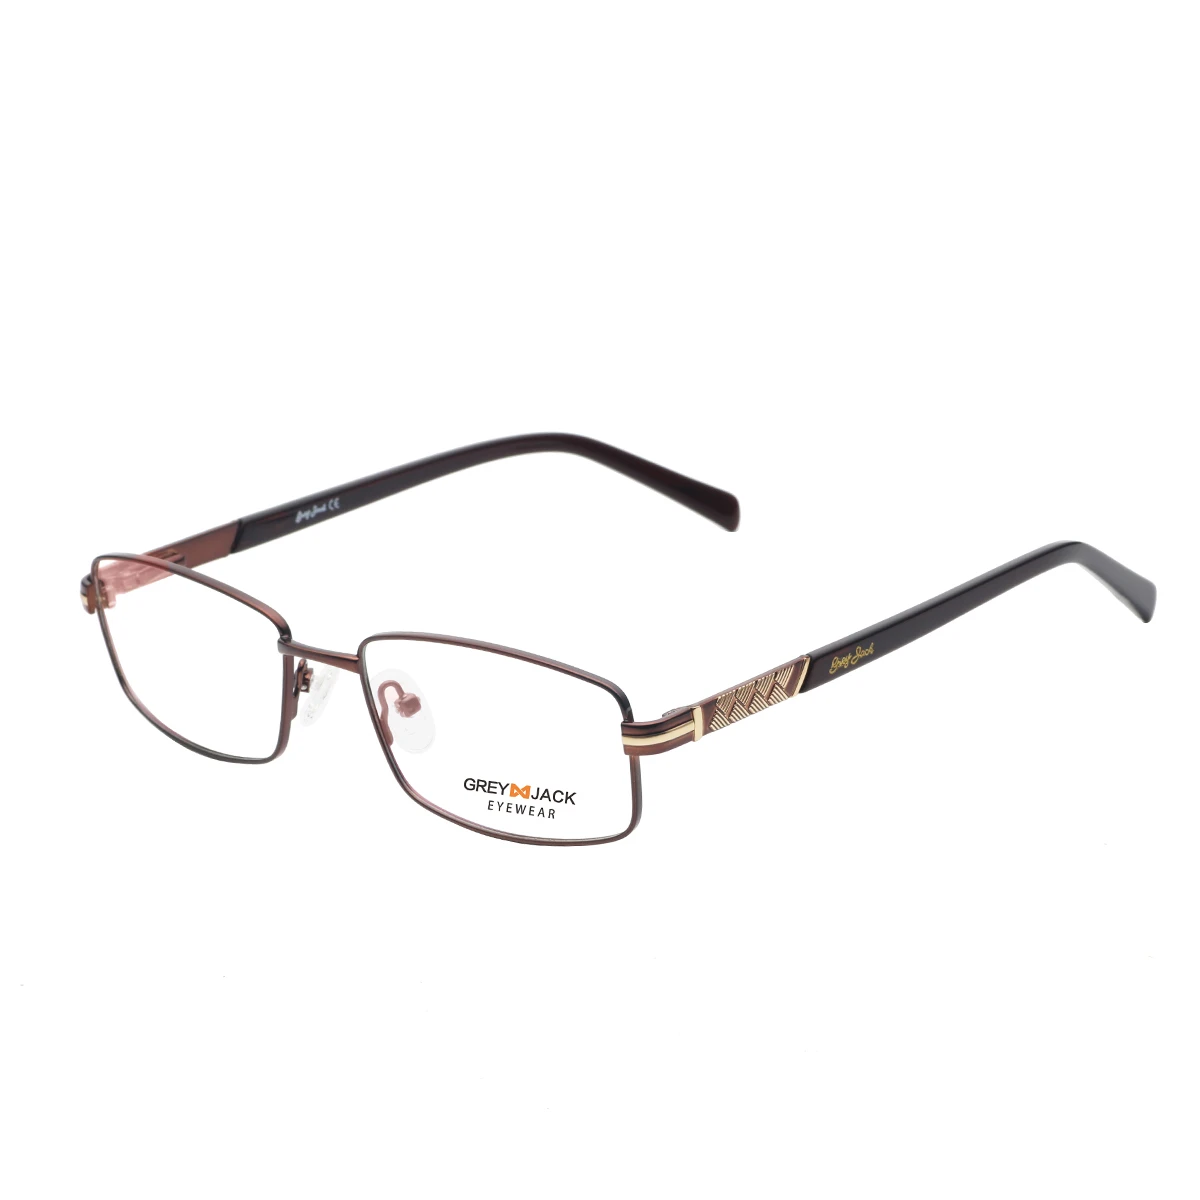 Hot Sell Fashion High Quality Eyewear Metal Square WITH SPRING Frame Eyeglasses Business Optical spectacle Frames In Stock